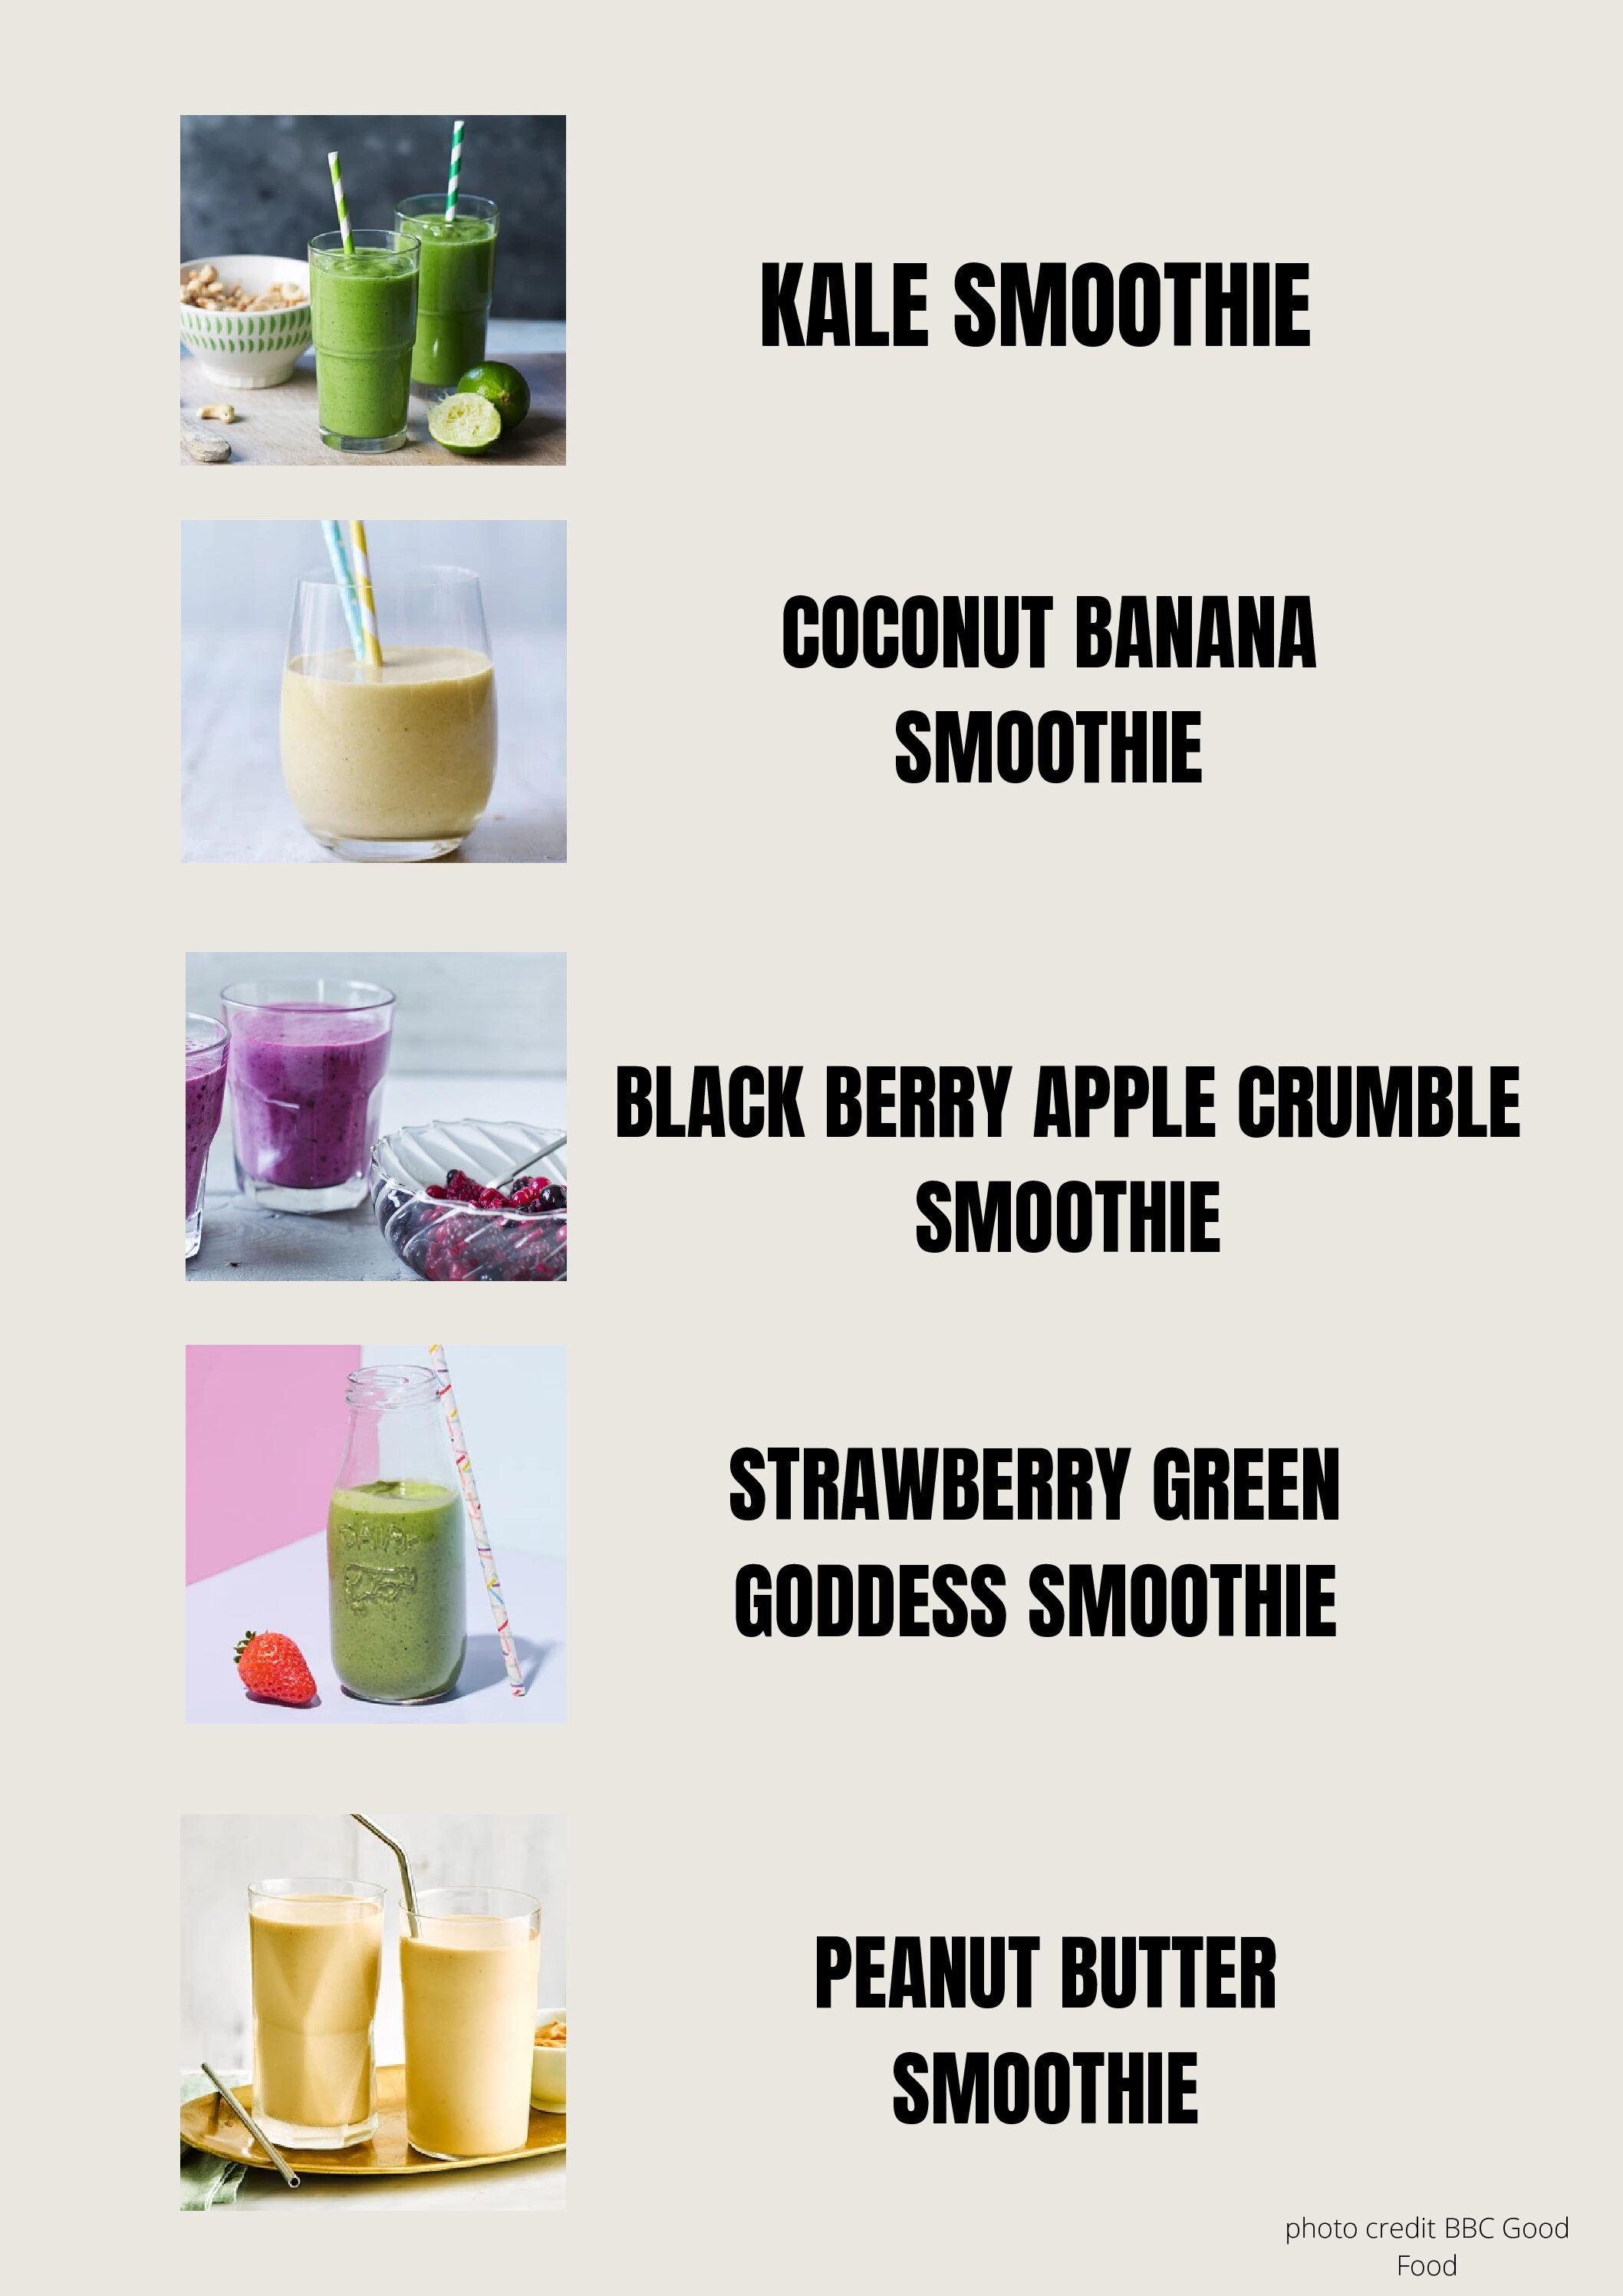 5 Protein Smoothie Ideas Healthy Wellness This Veganuary 2022